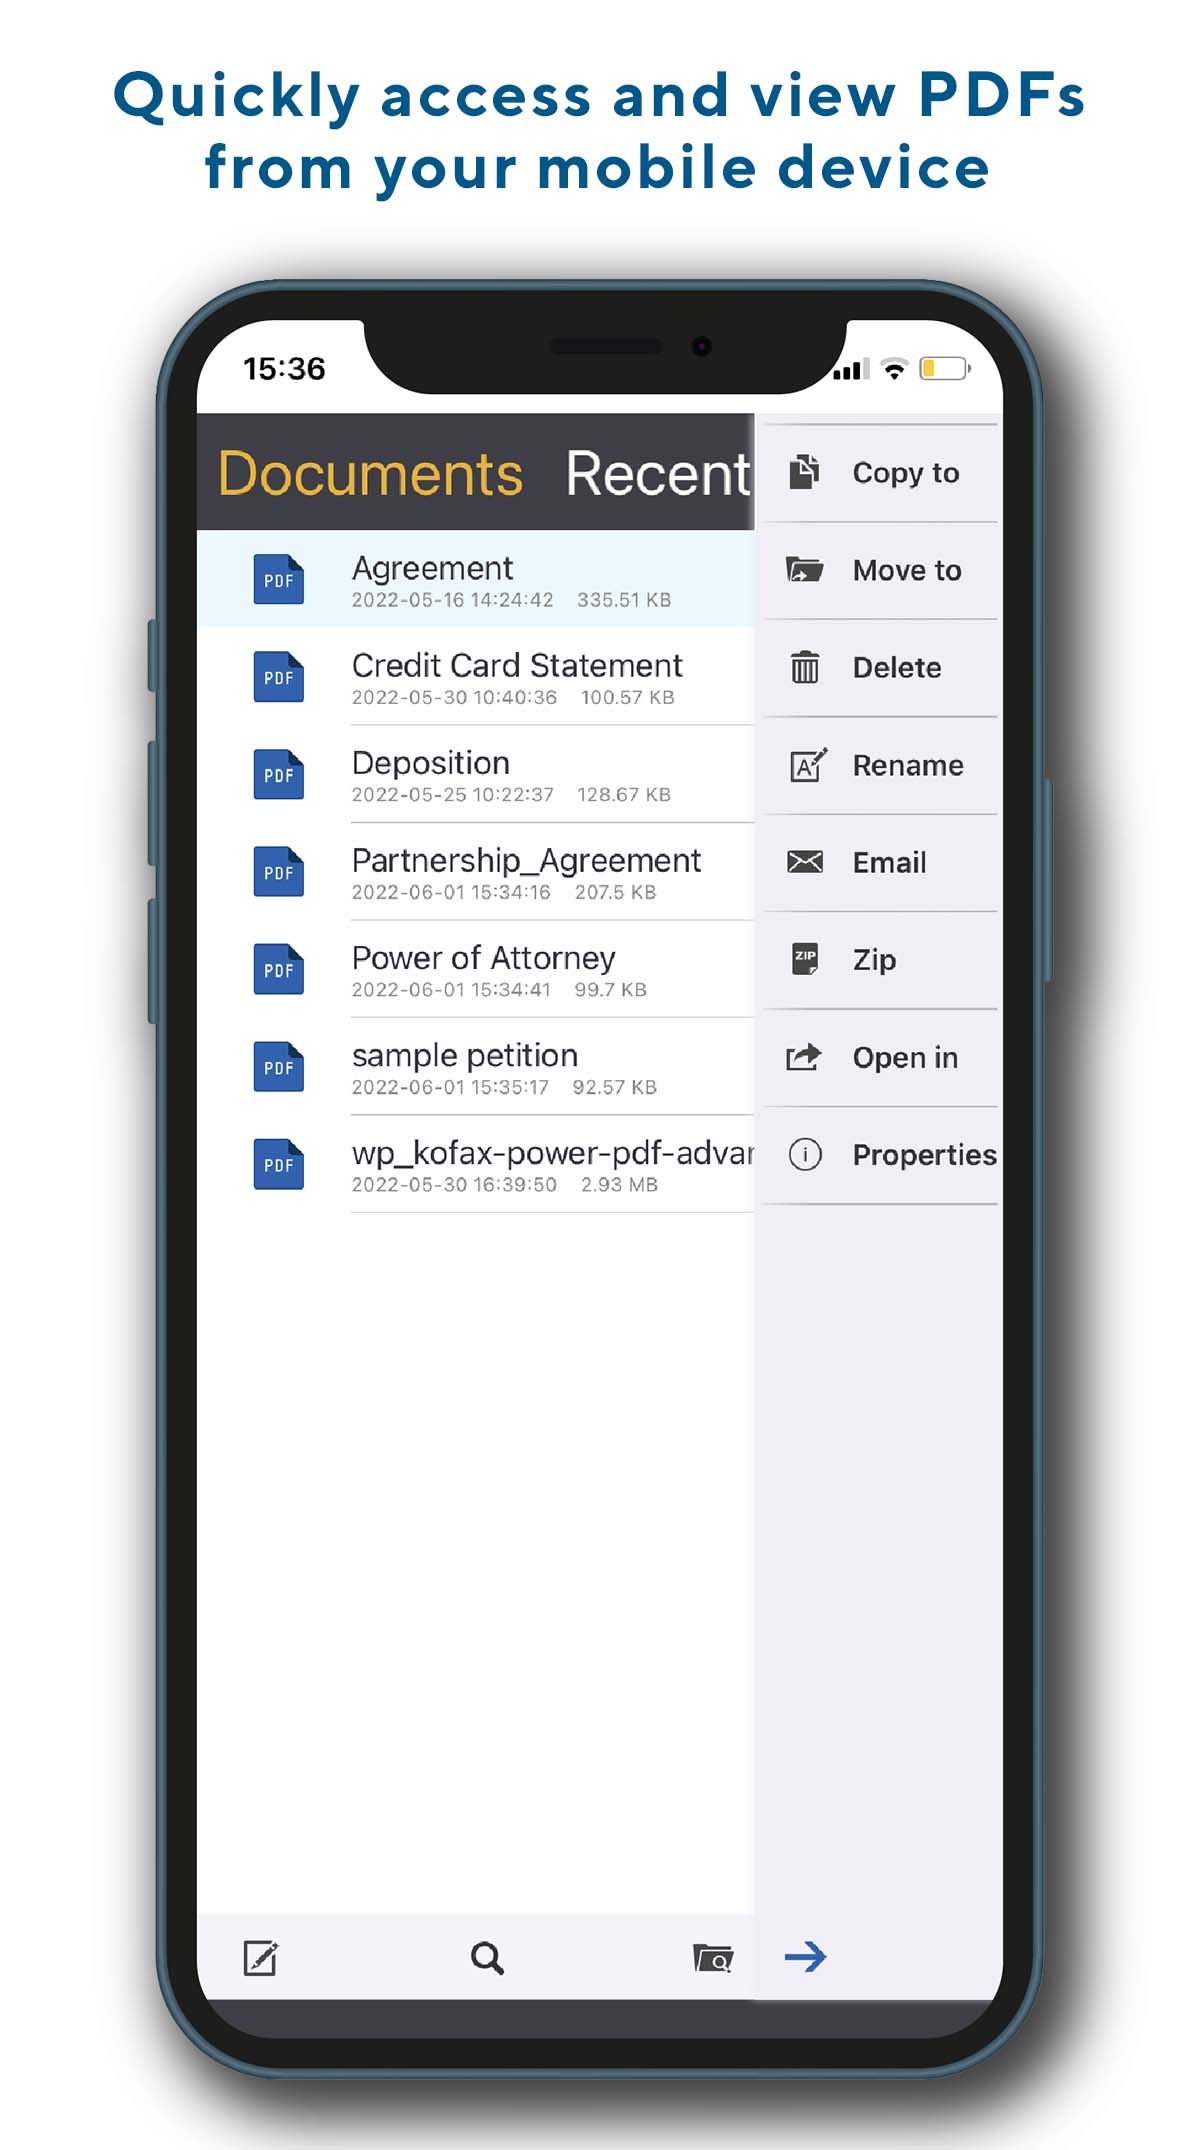 Quickly access and view PDFs from your mobile device